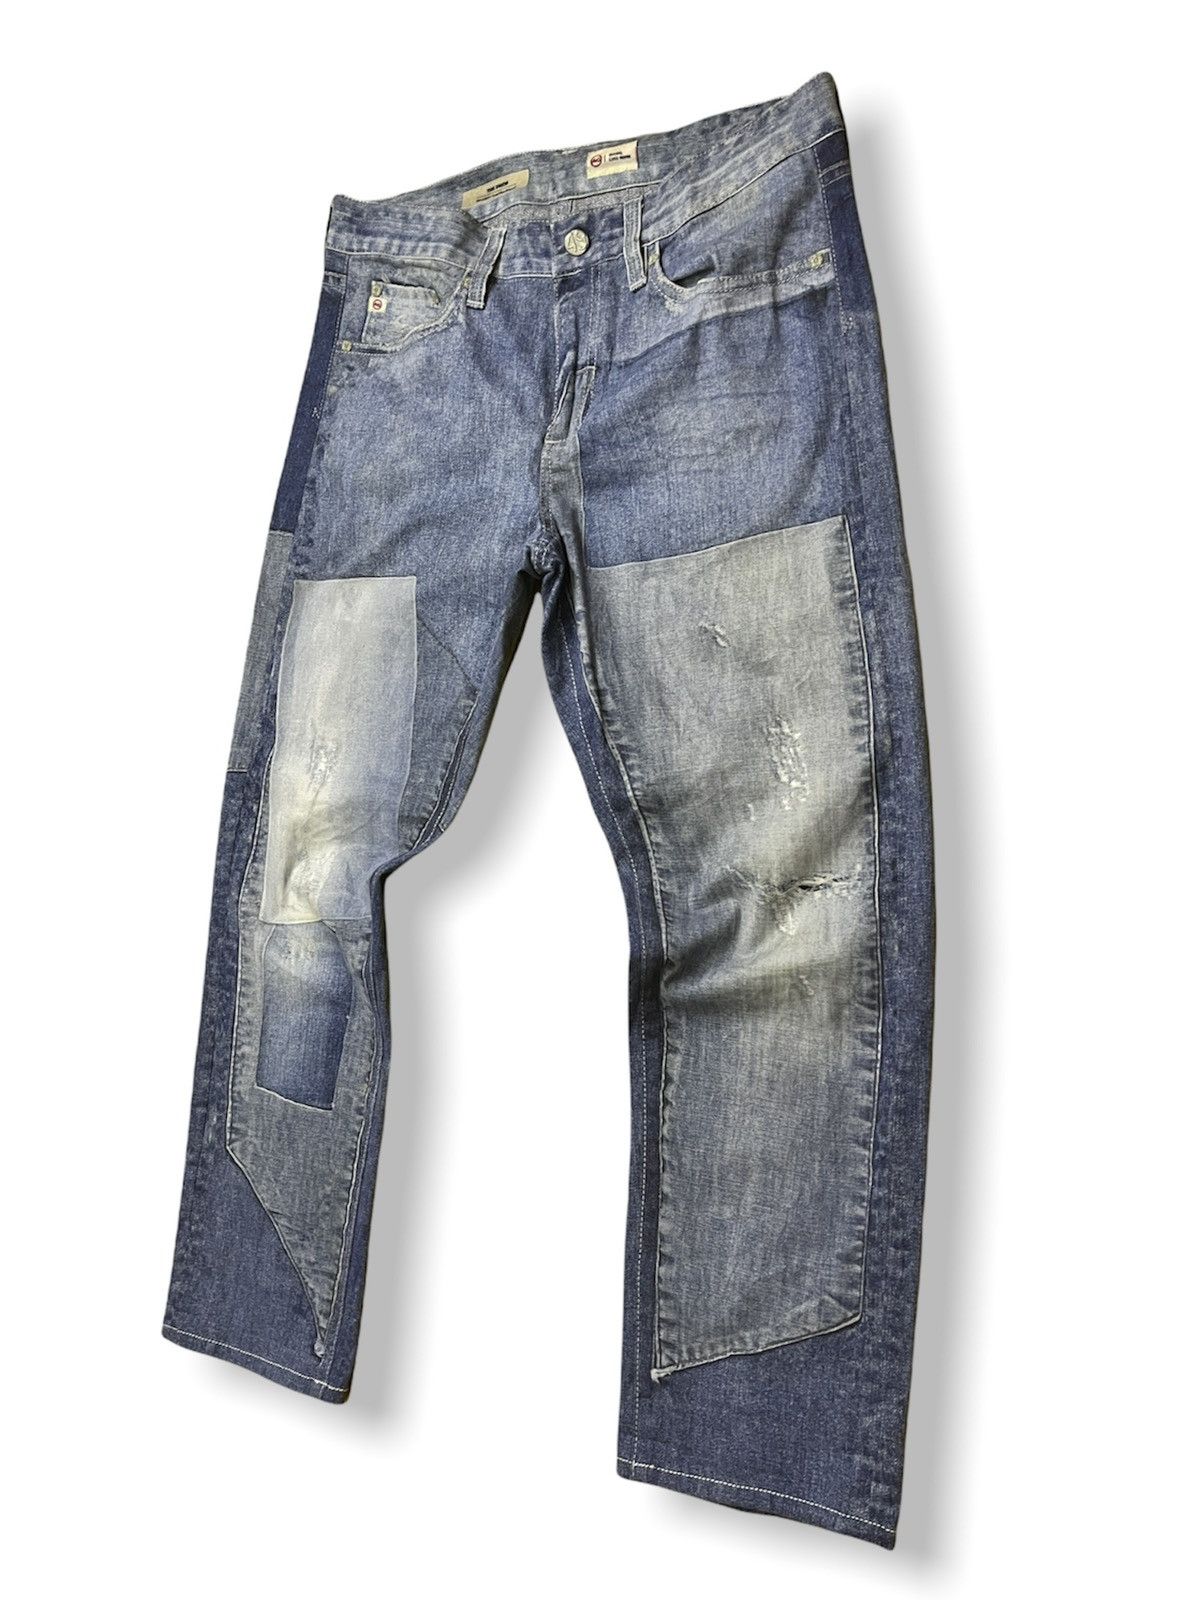 DISTRESSED PRINTED AG ADRIANO GOLDSCHMIED DENIM PANTS - 5